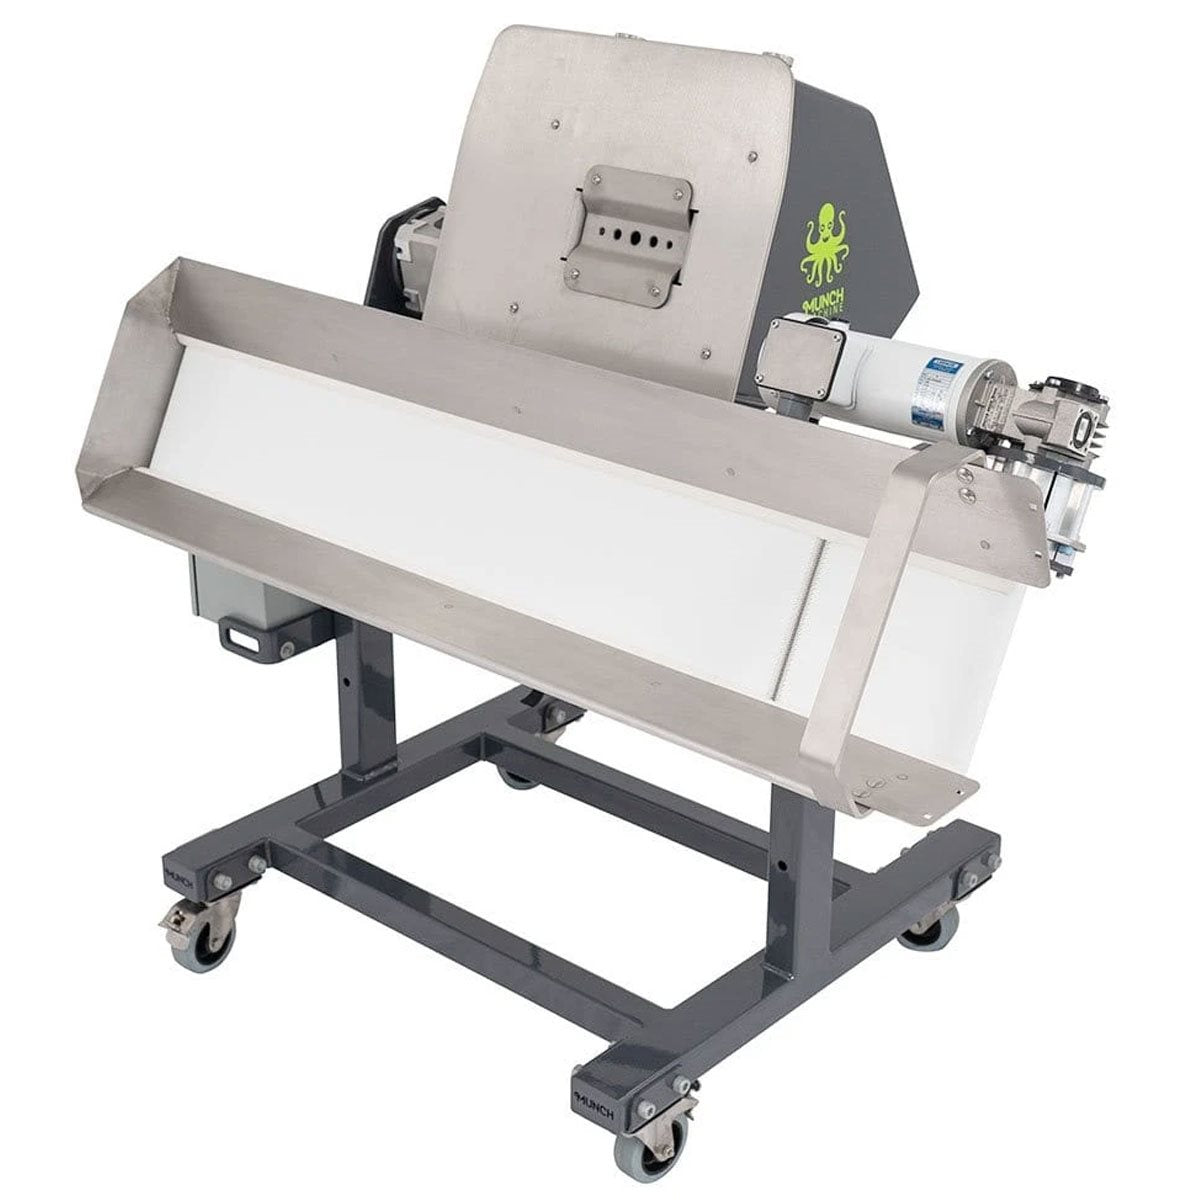 Product Secondary Image:Munch Machine Conveyor Single Bucker Rolling to the Right